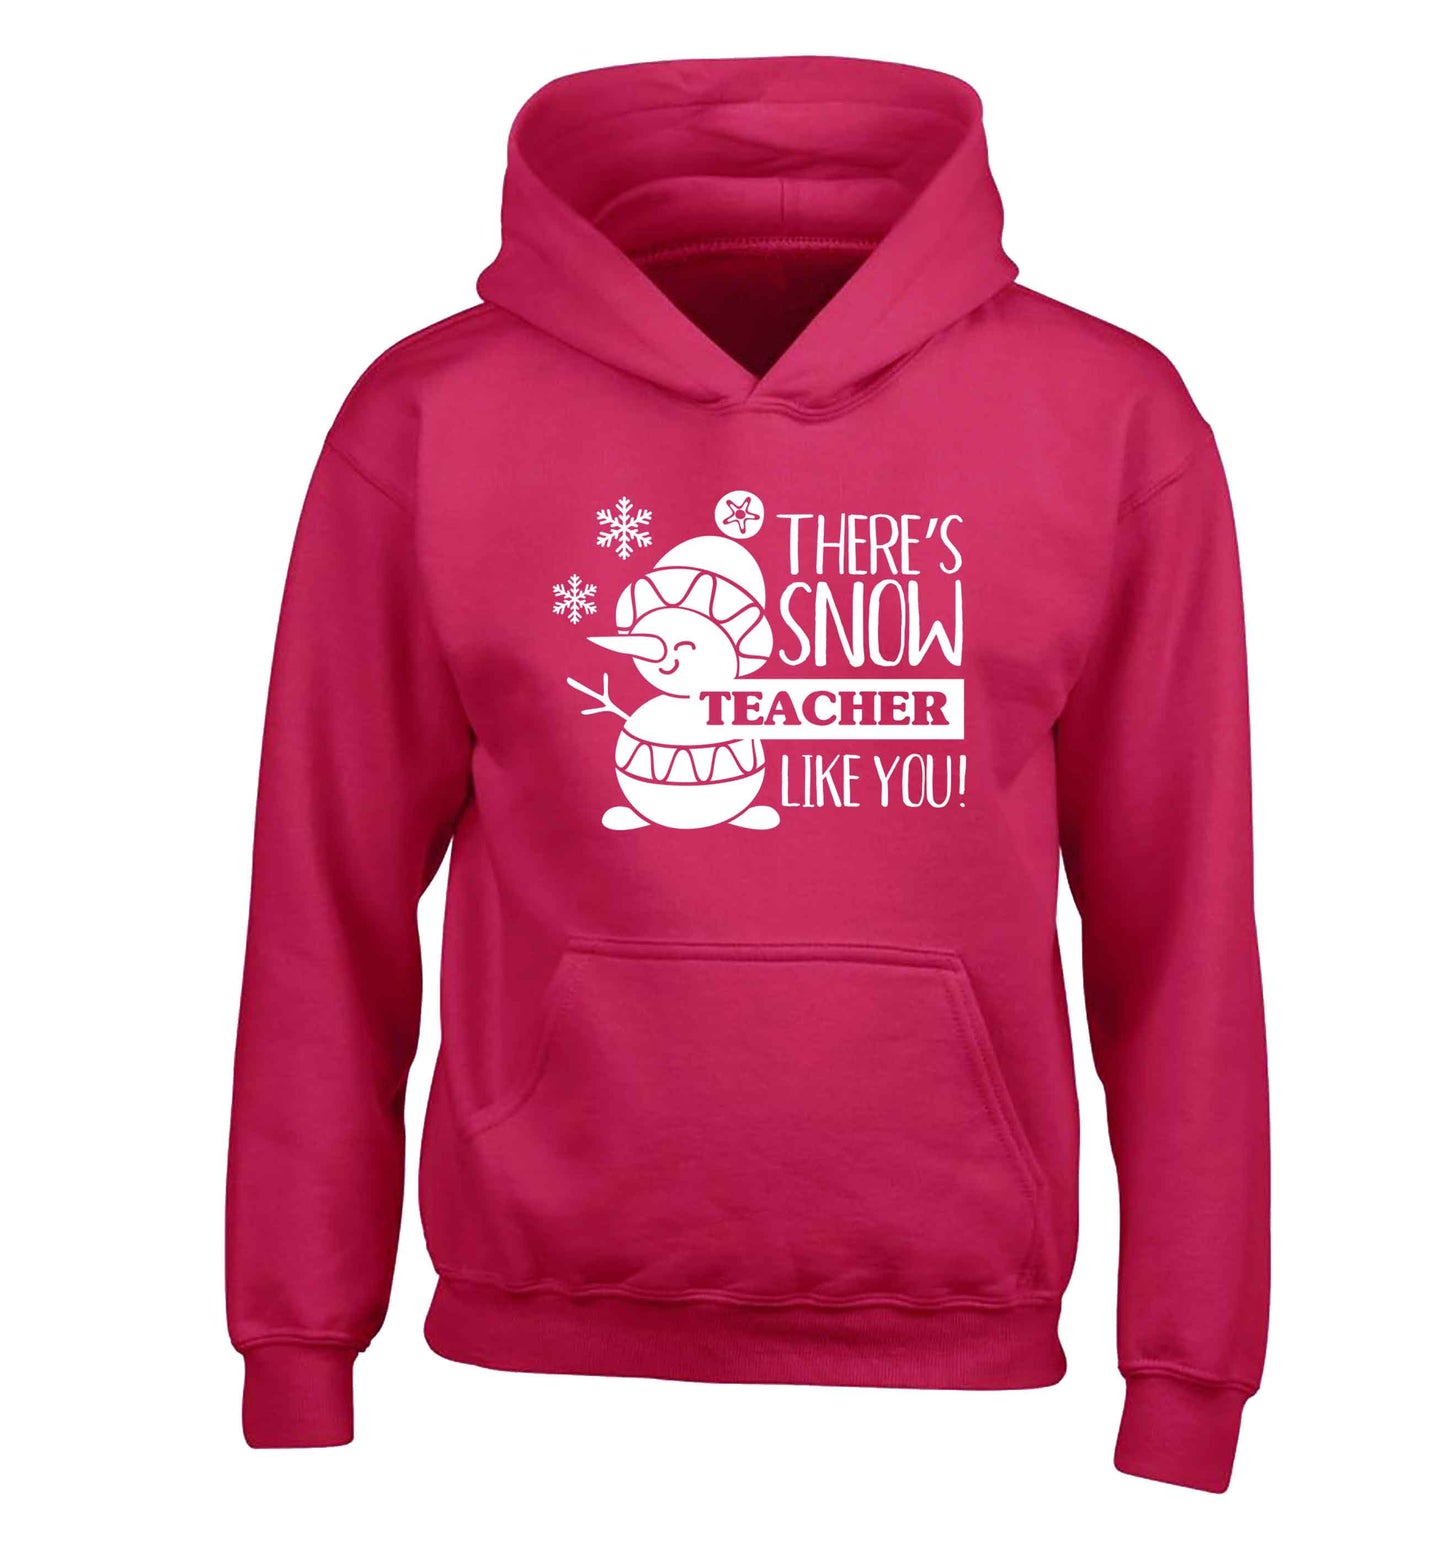 There's snow teacher like you children's pink hoodie 12-13 Years